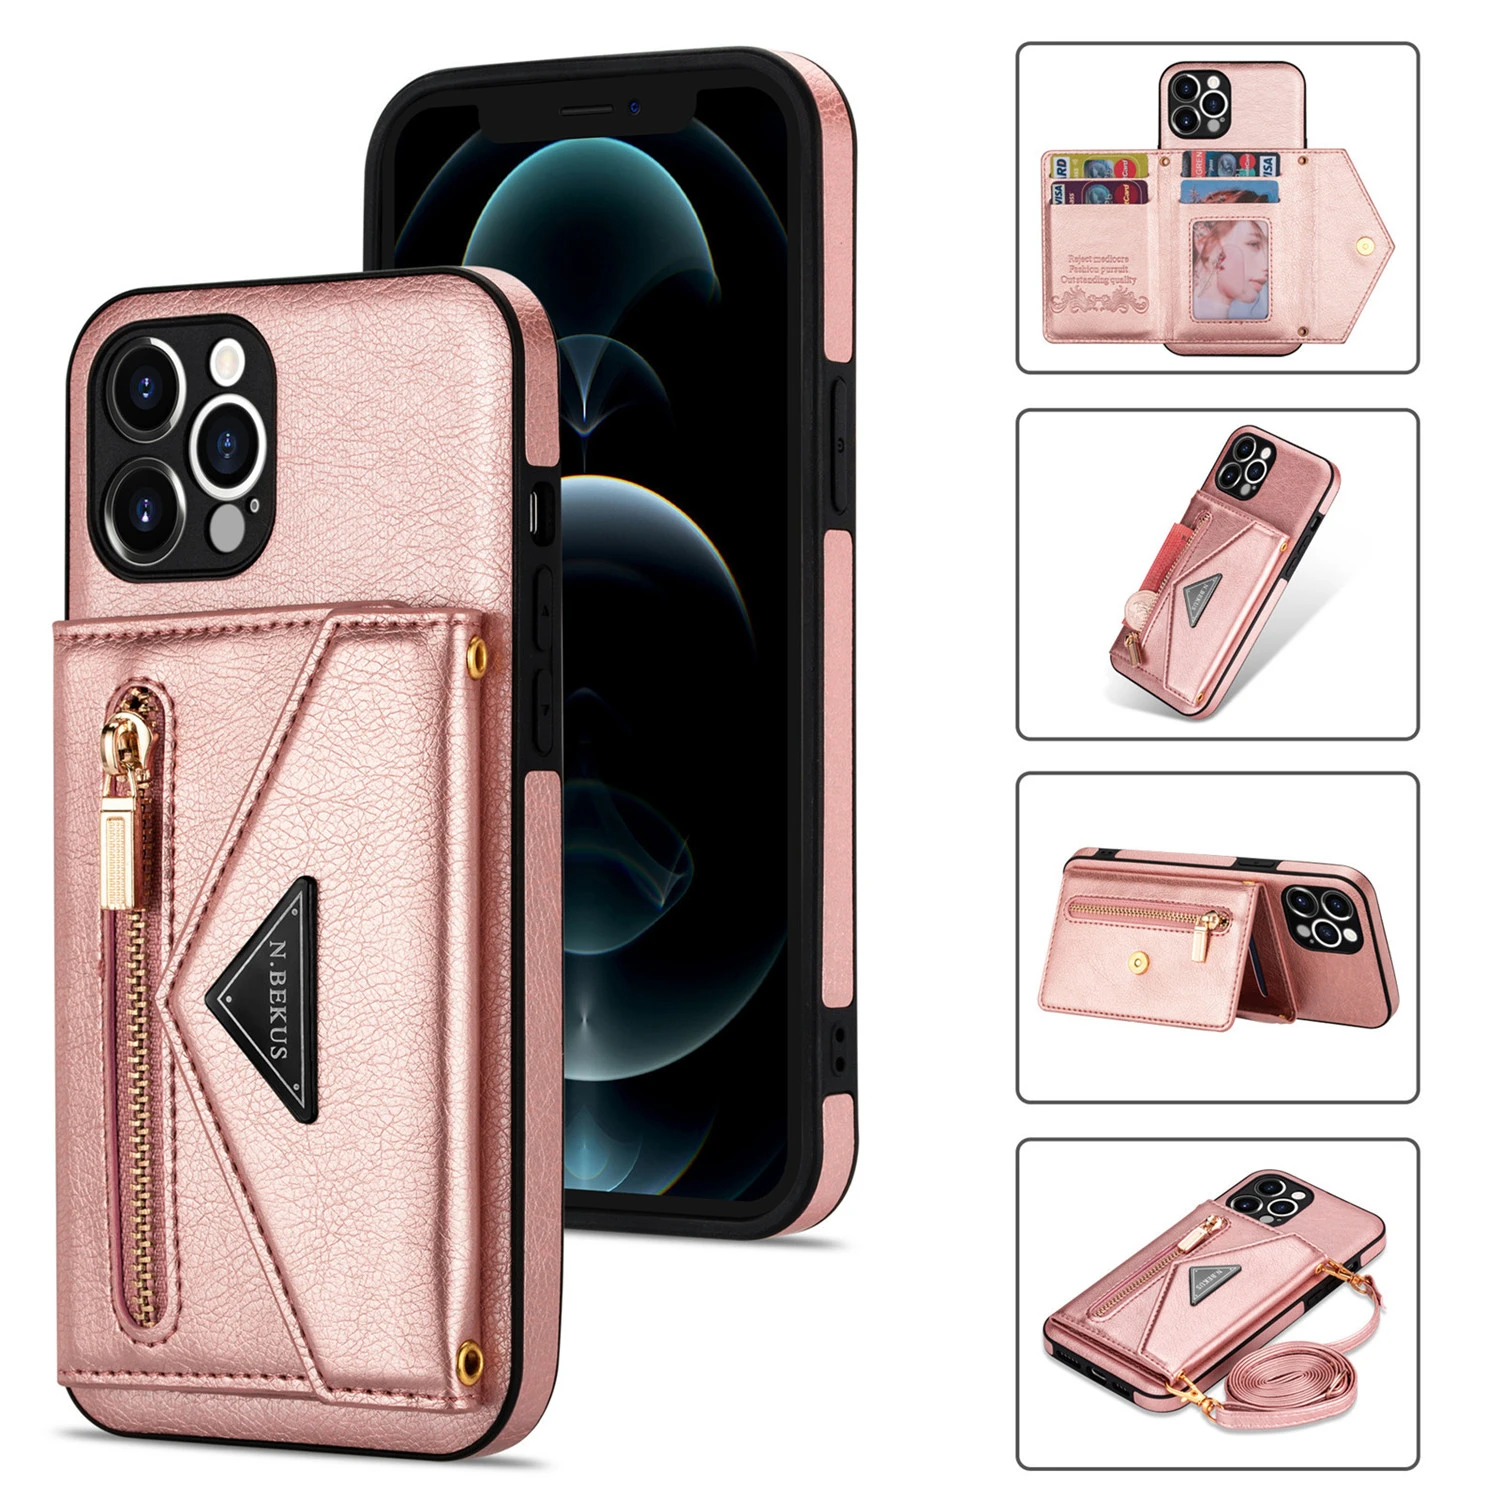 Zipper Wallet for IPhone 13 Pro Max 12 Mini 11 X XR XS  7 8 Plus Case with Card Holder Lanyard Strap Crossbody Leather Cover iphone 13 pro max case clear